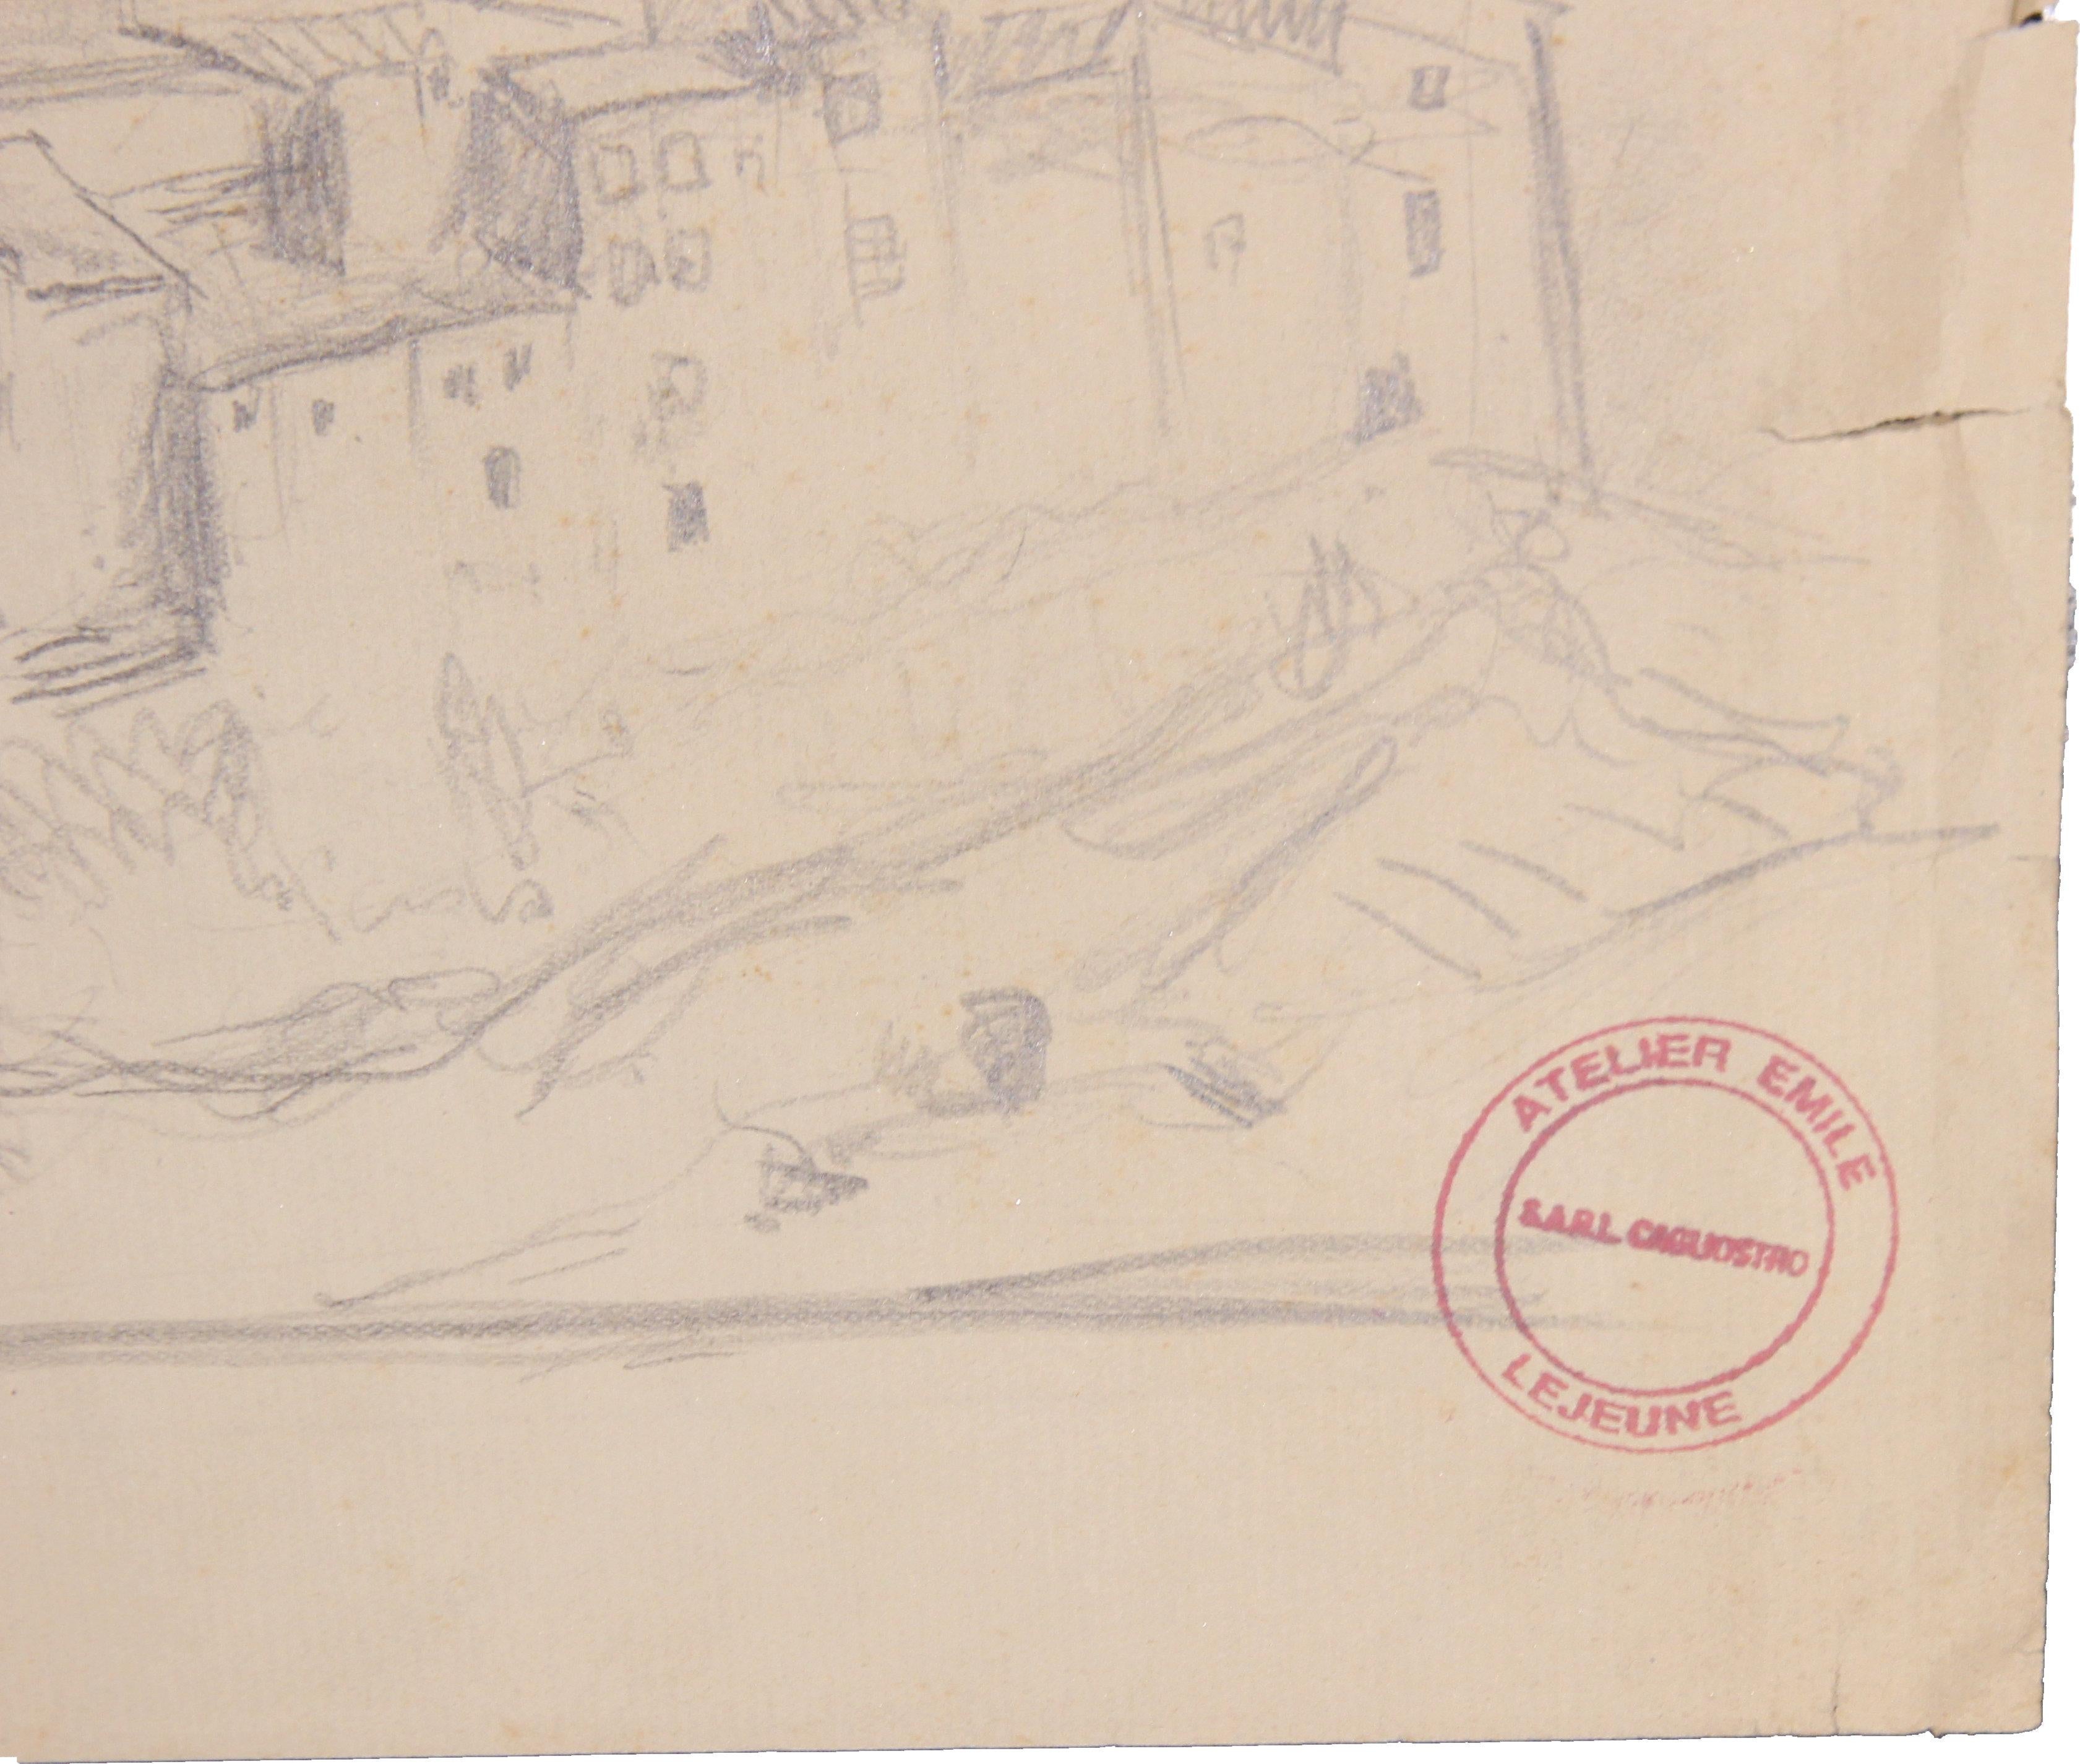 Landscape study of a French town on a mountain top. The work is signed and stamped by the artist. The paper is not framed.

Many others are available. Please inquire to buy the entire collection.

Artist Biography: Emile Lejeune was a painter form